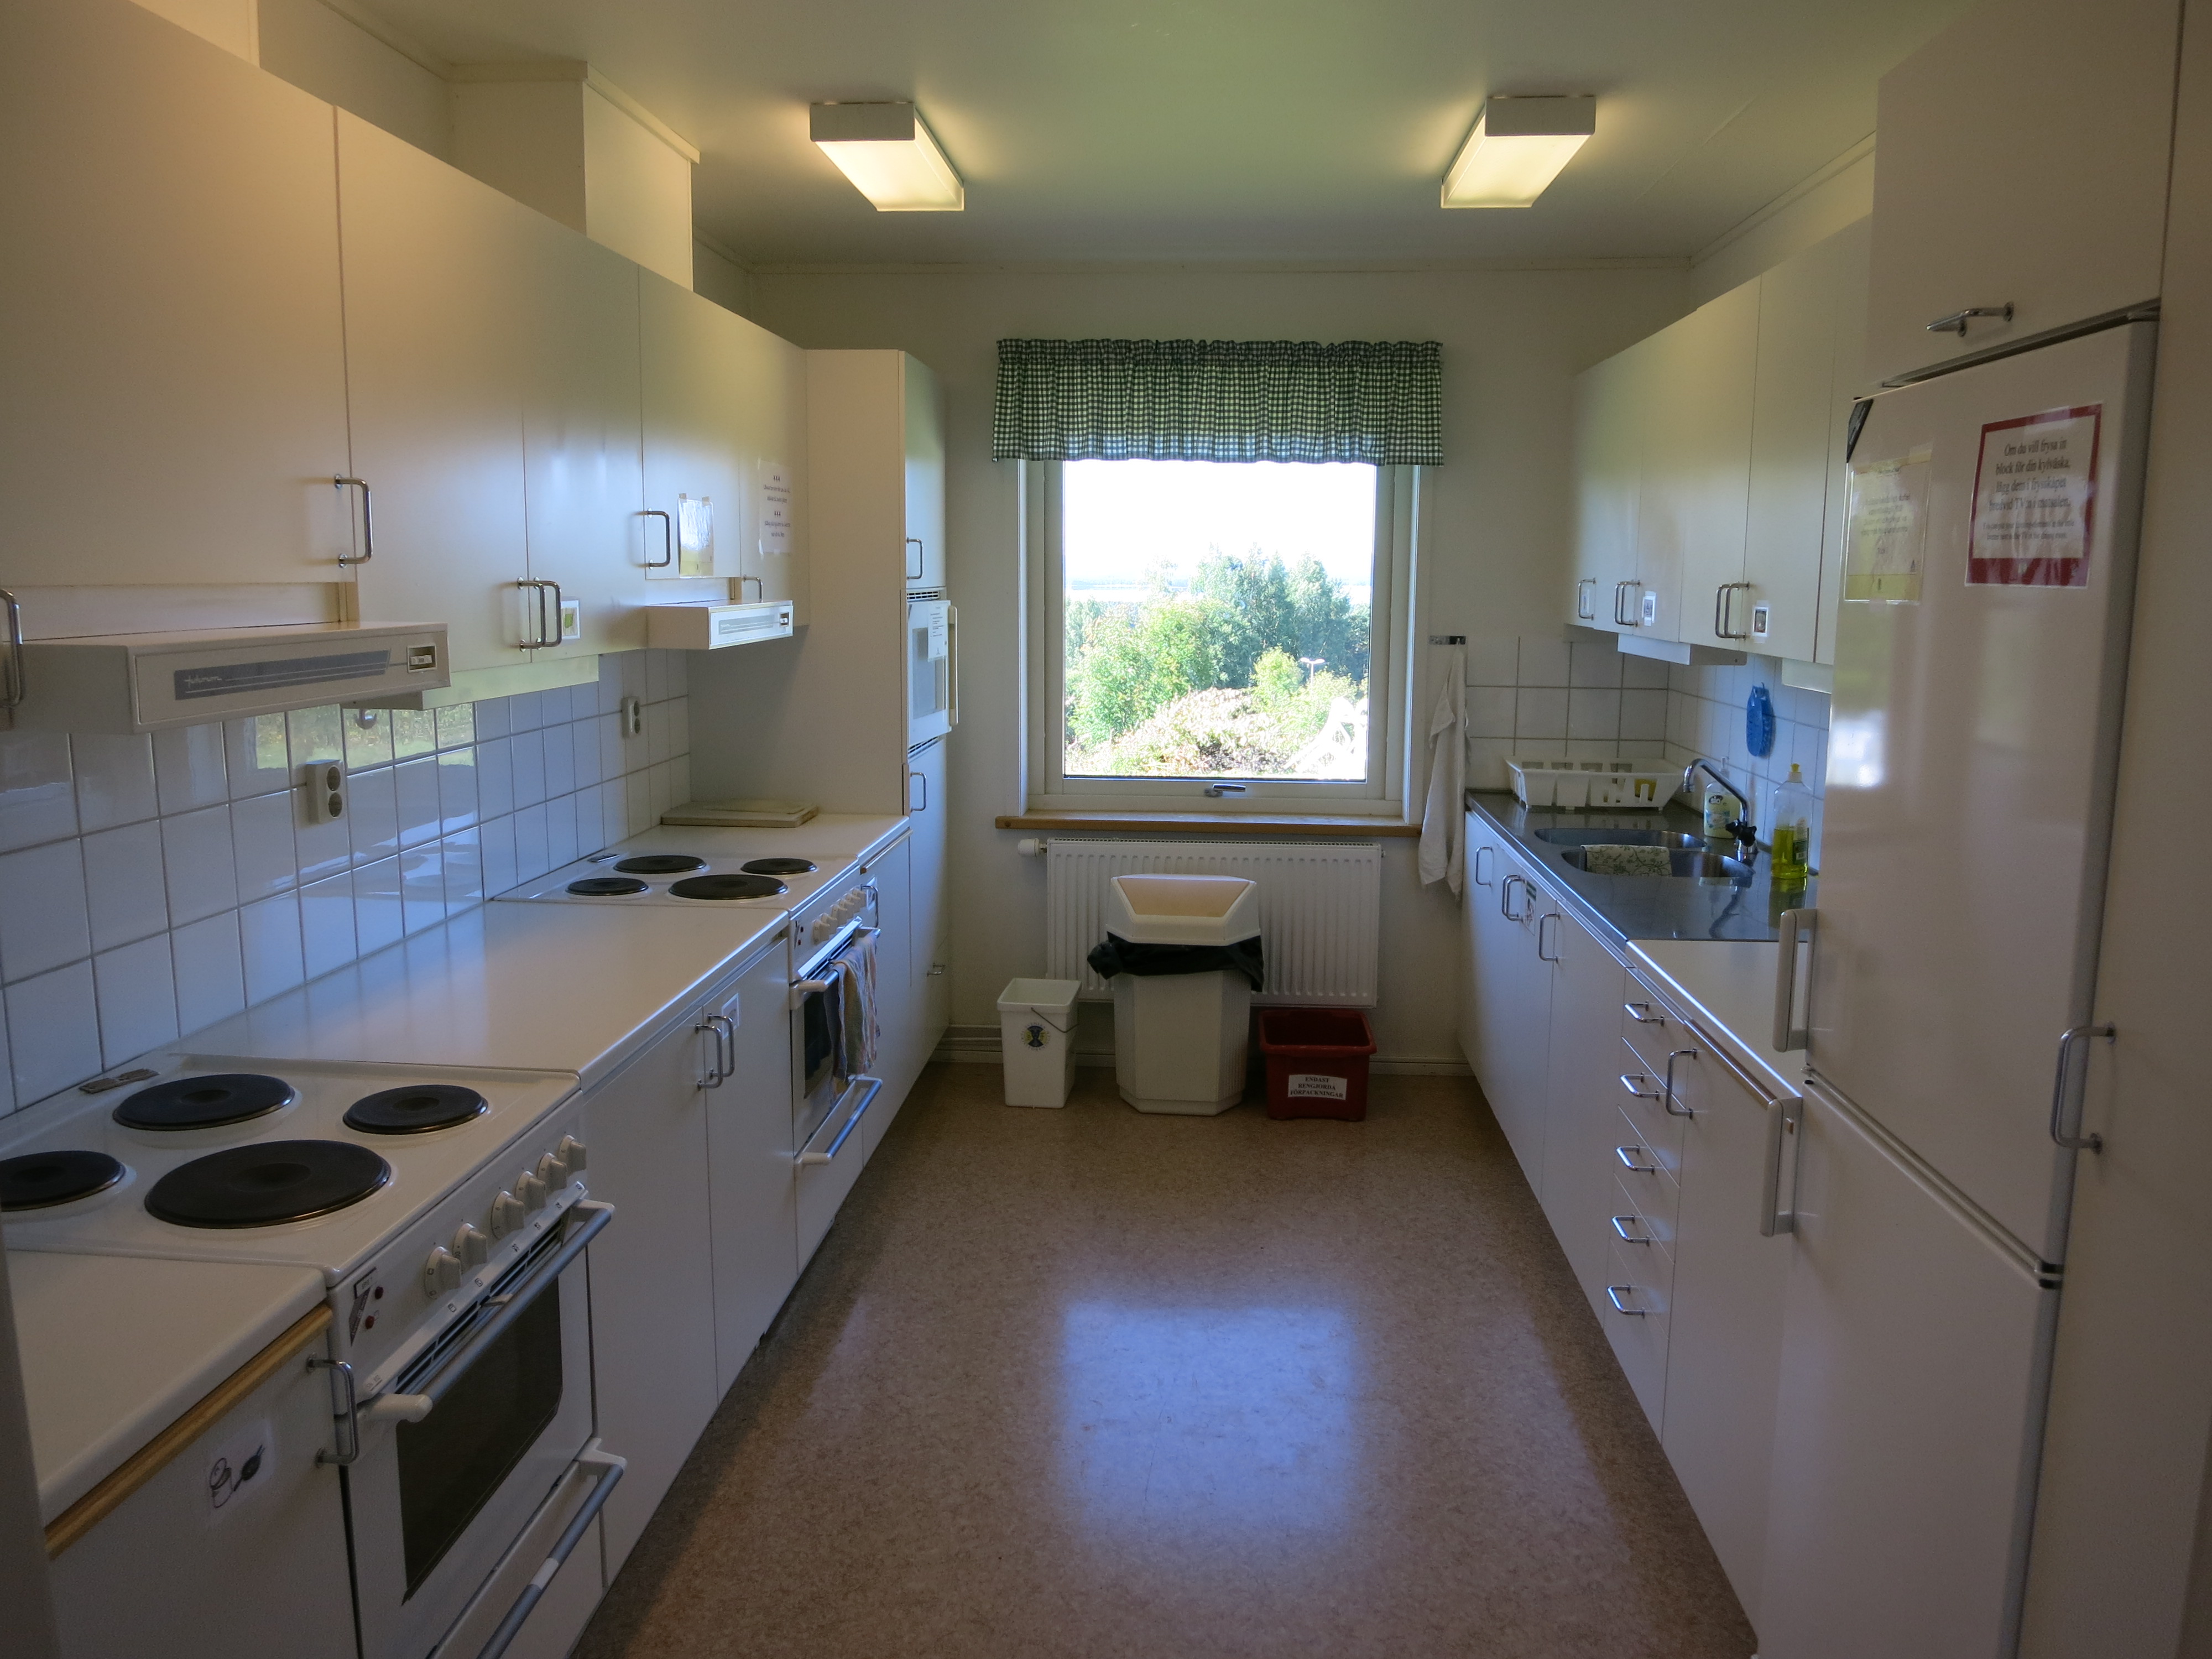 Orsa Hostel has 2 kitchens for guests